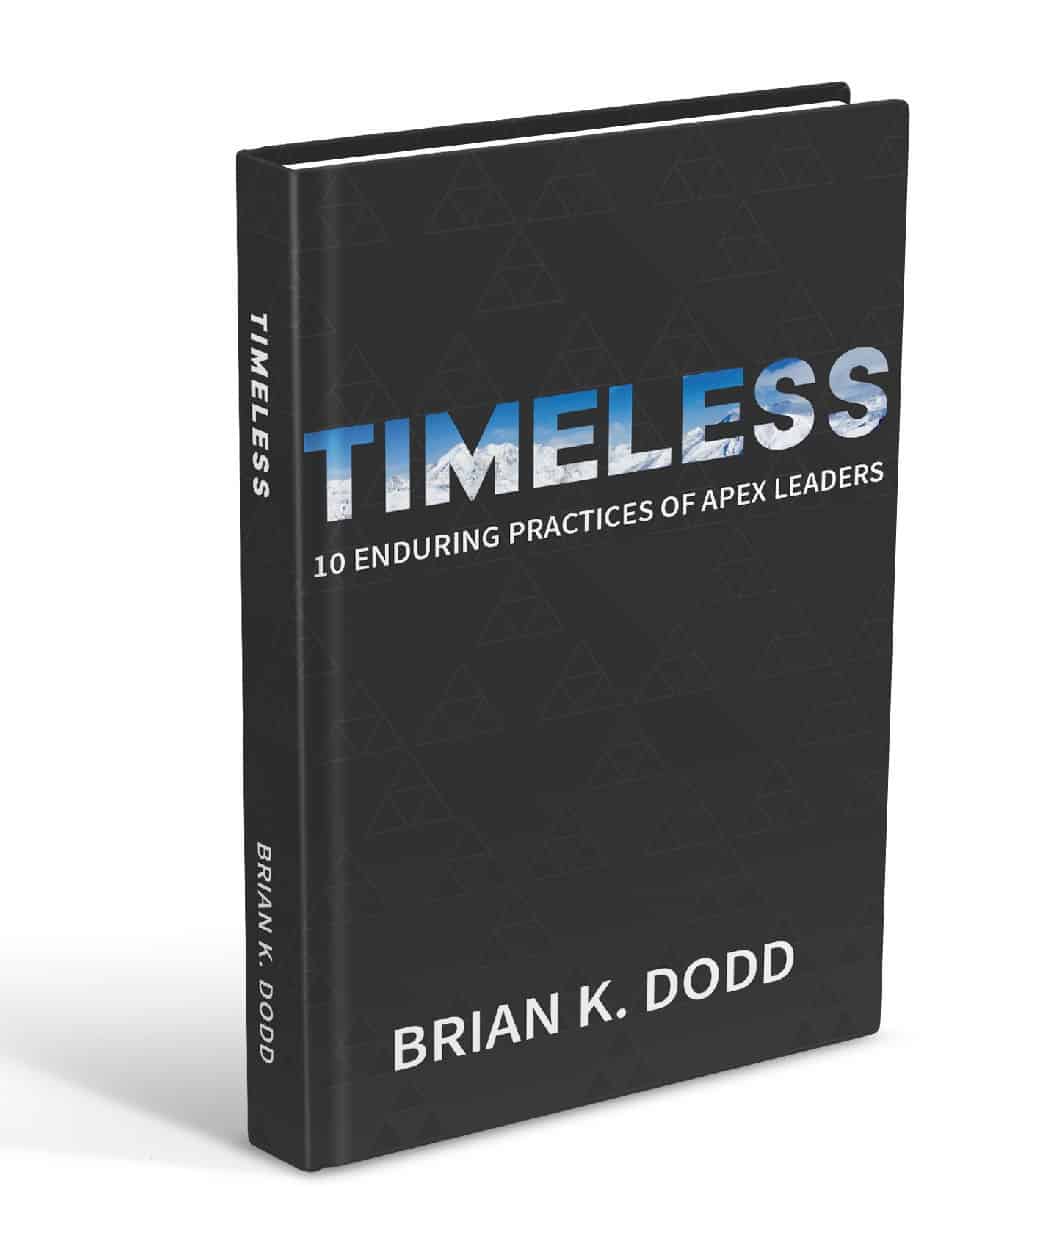 book cover for Timeless leadership book